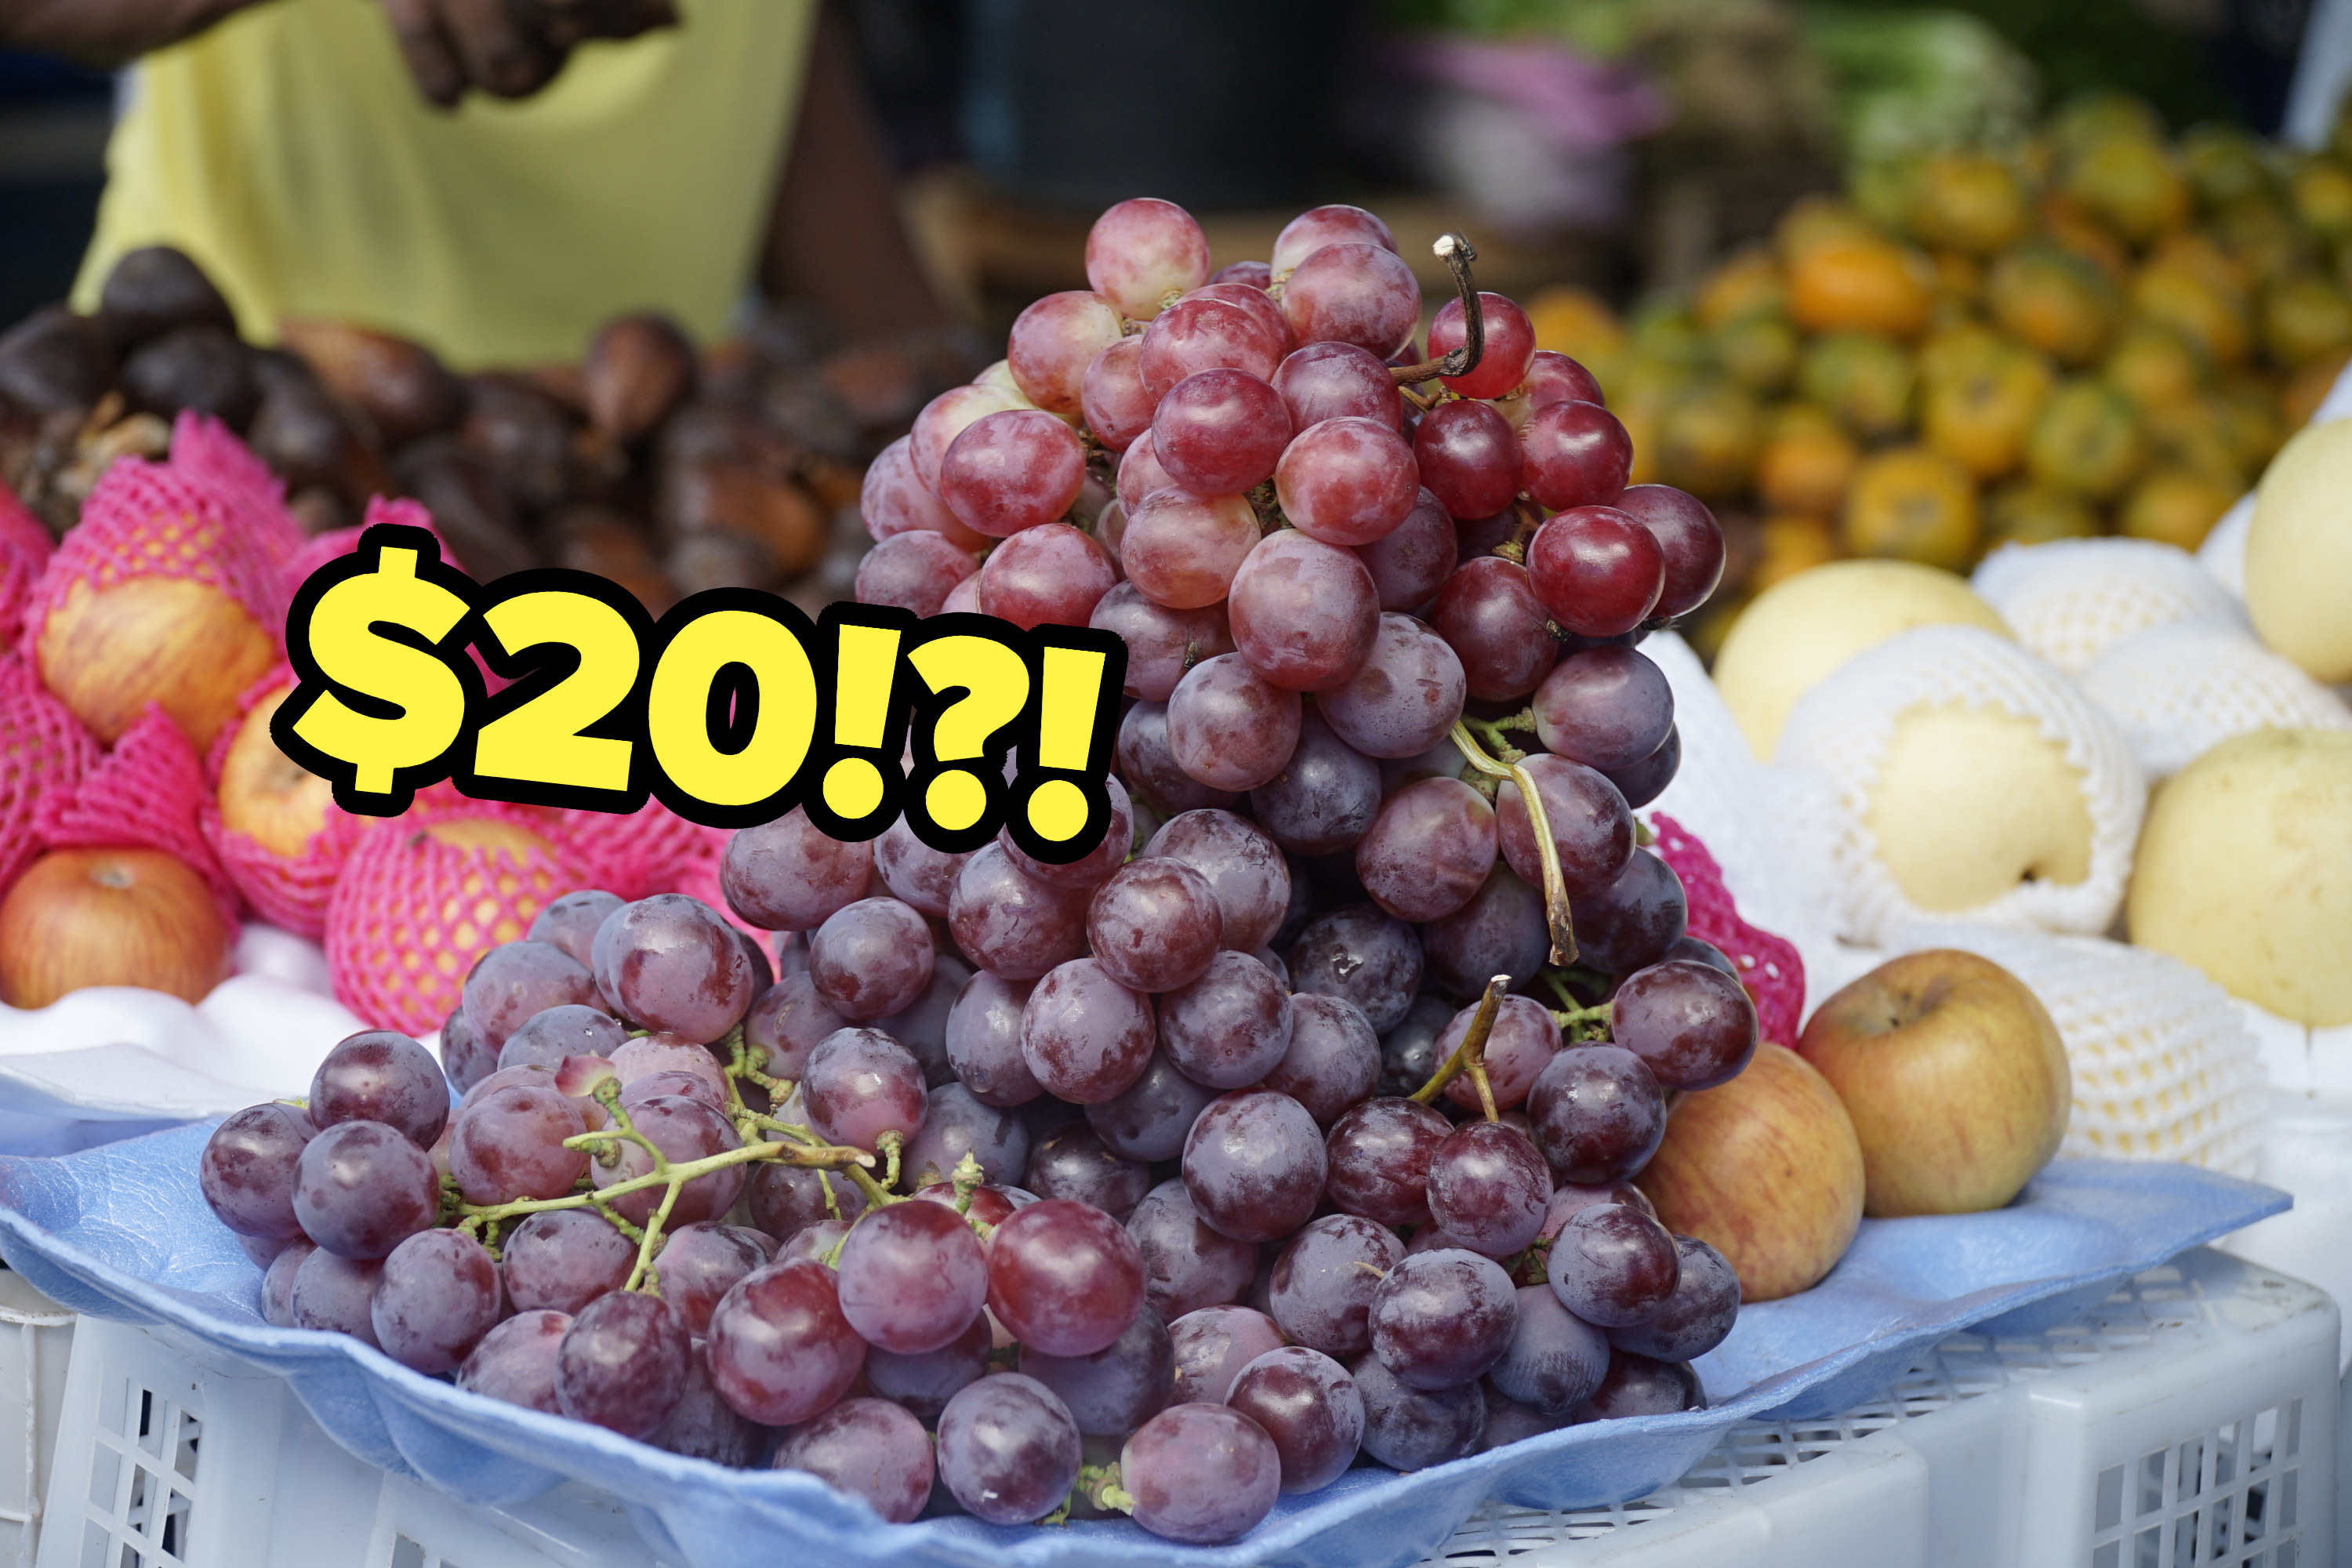 Grapes for sale at an outdoor market